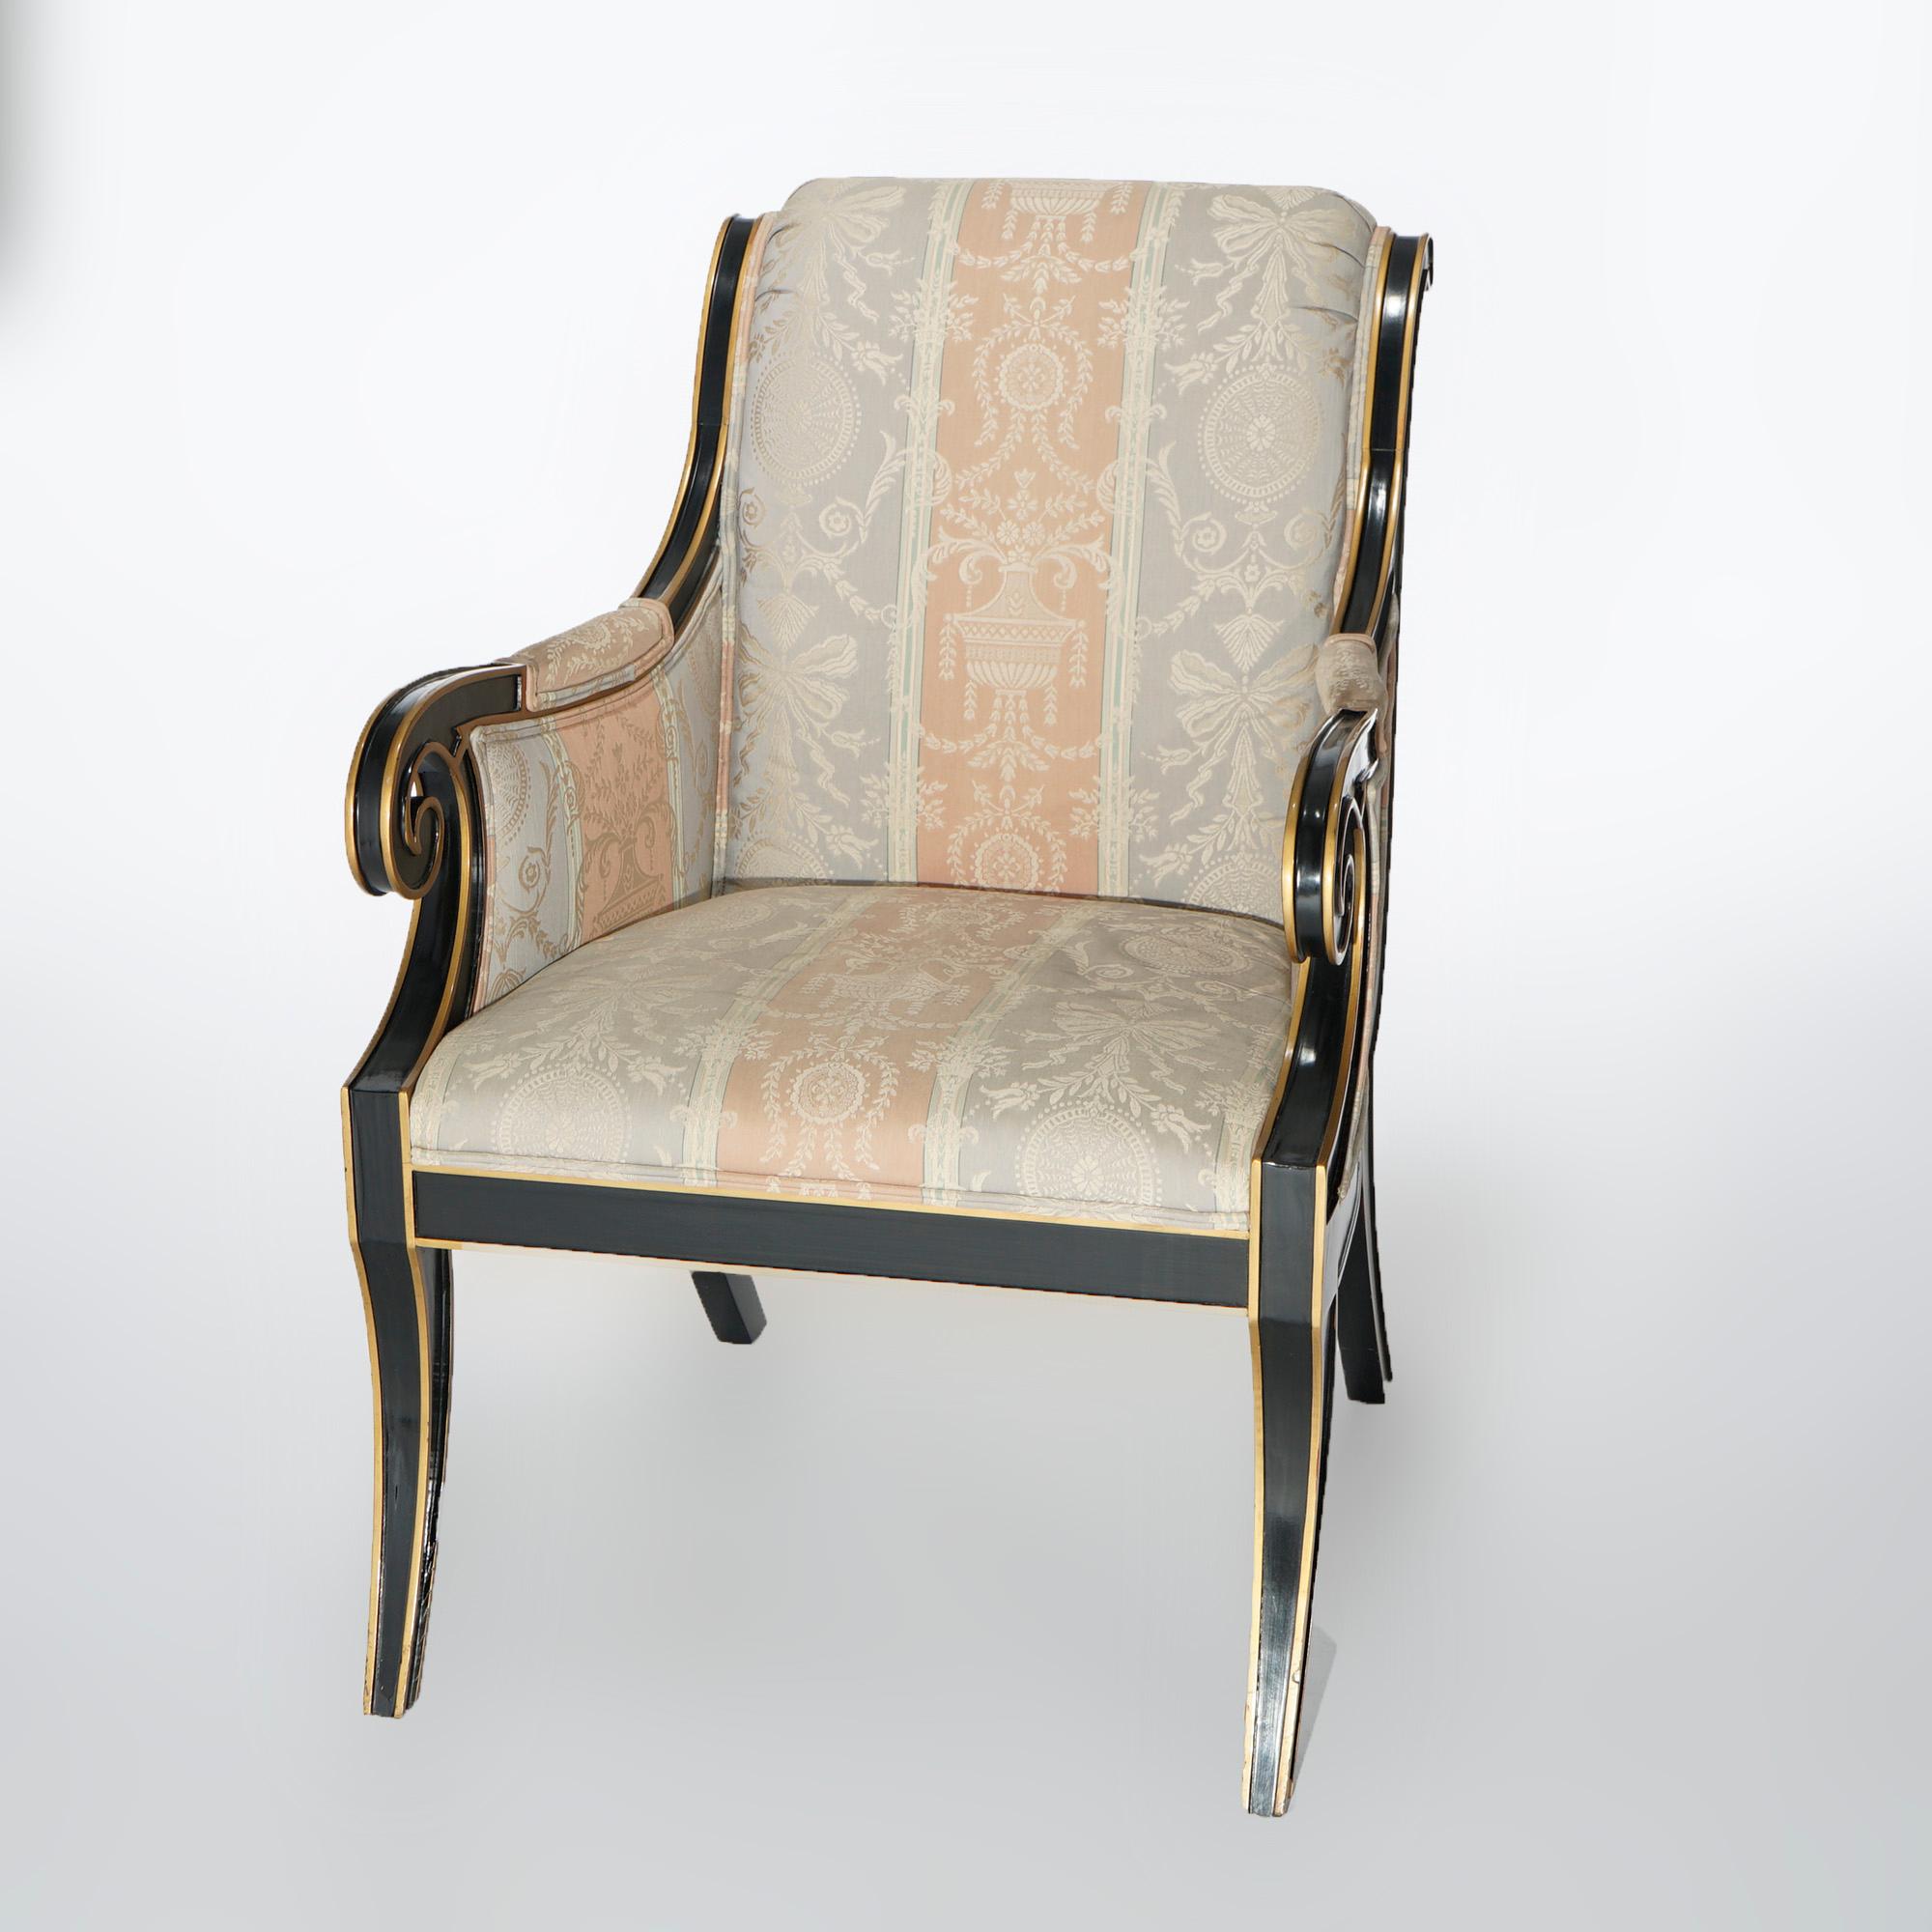 A matching pair of French Empire style upholstered armchairs by Drexel Heritage offer ebonized wood frames with scroll form arms and backs, gilt highlights throughout, maker label as photographed, 20th century

Measures- 37.5''H x 26.25''W x 34''D;